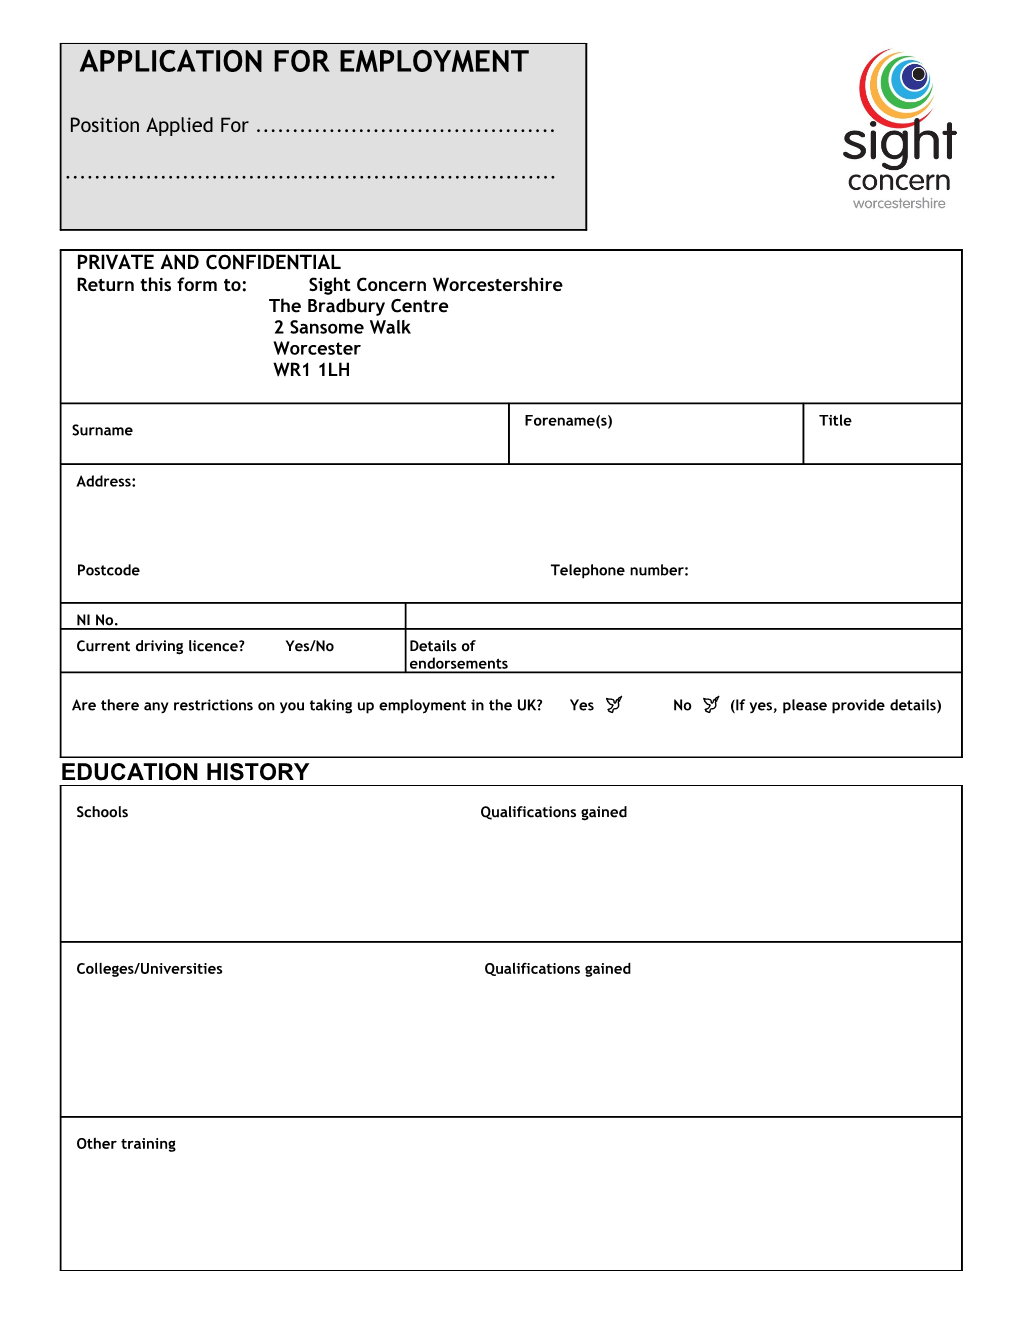 Application for Employment s181